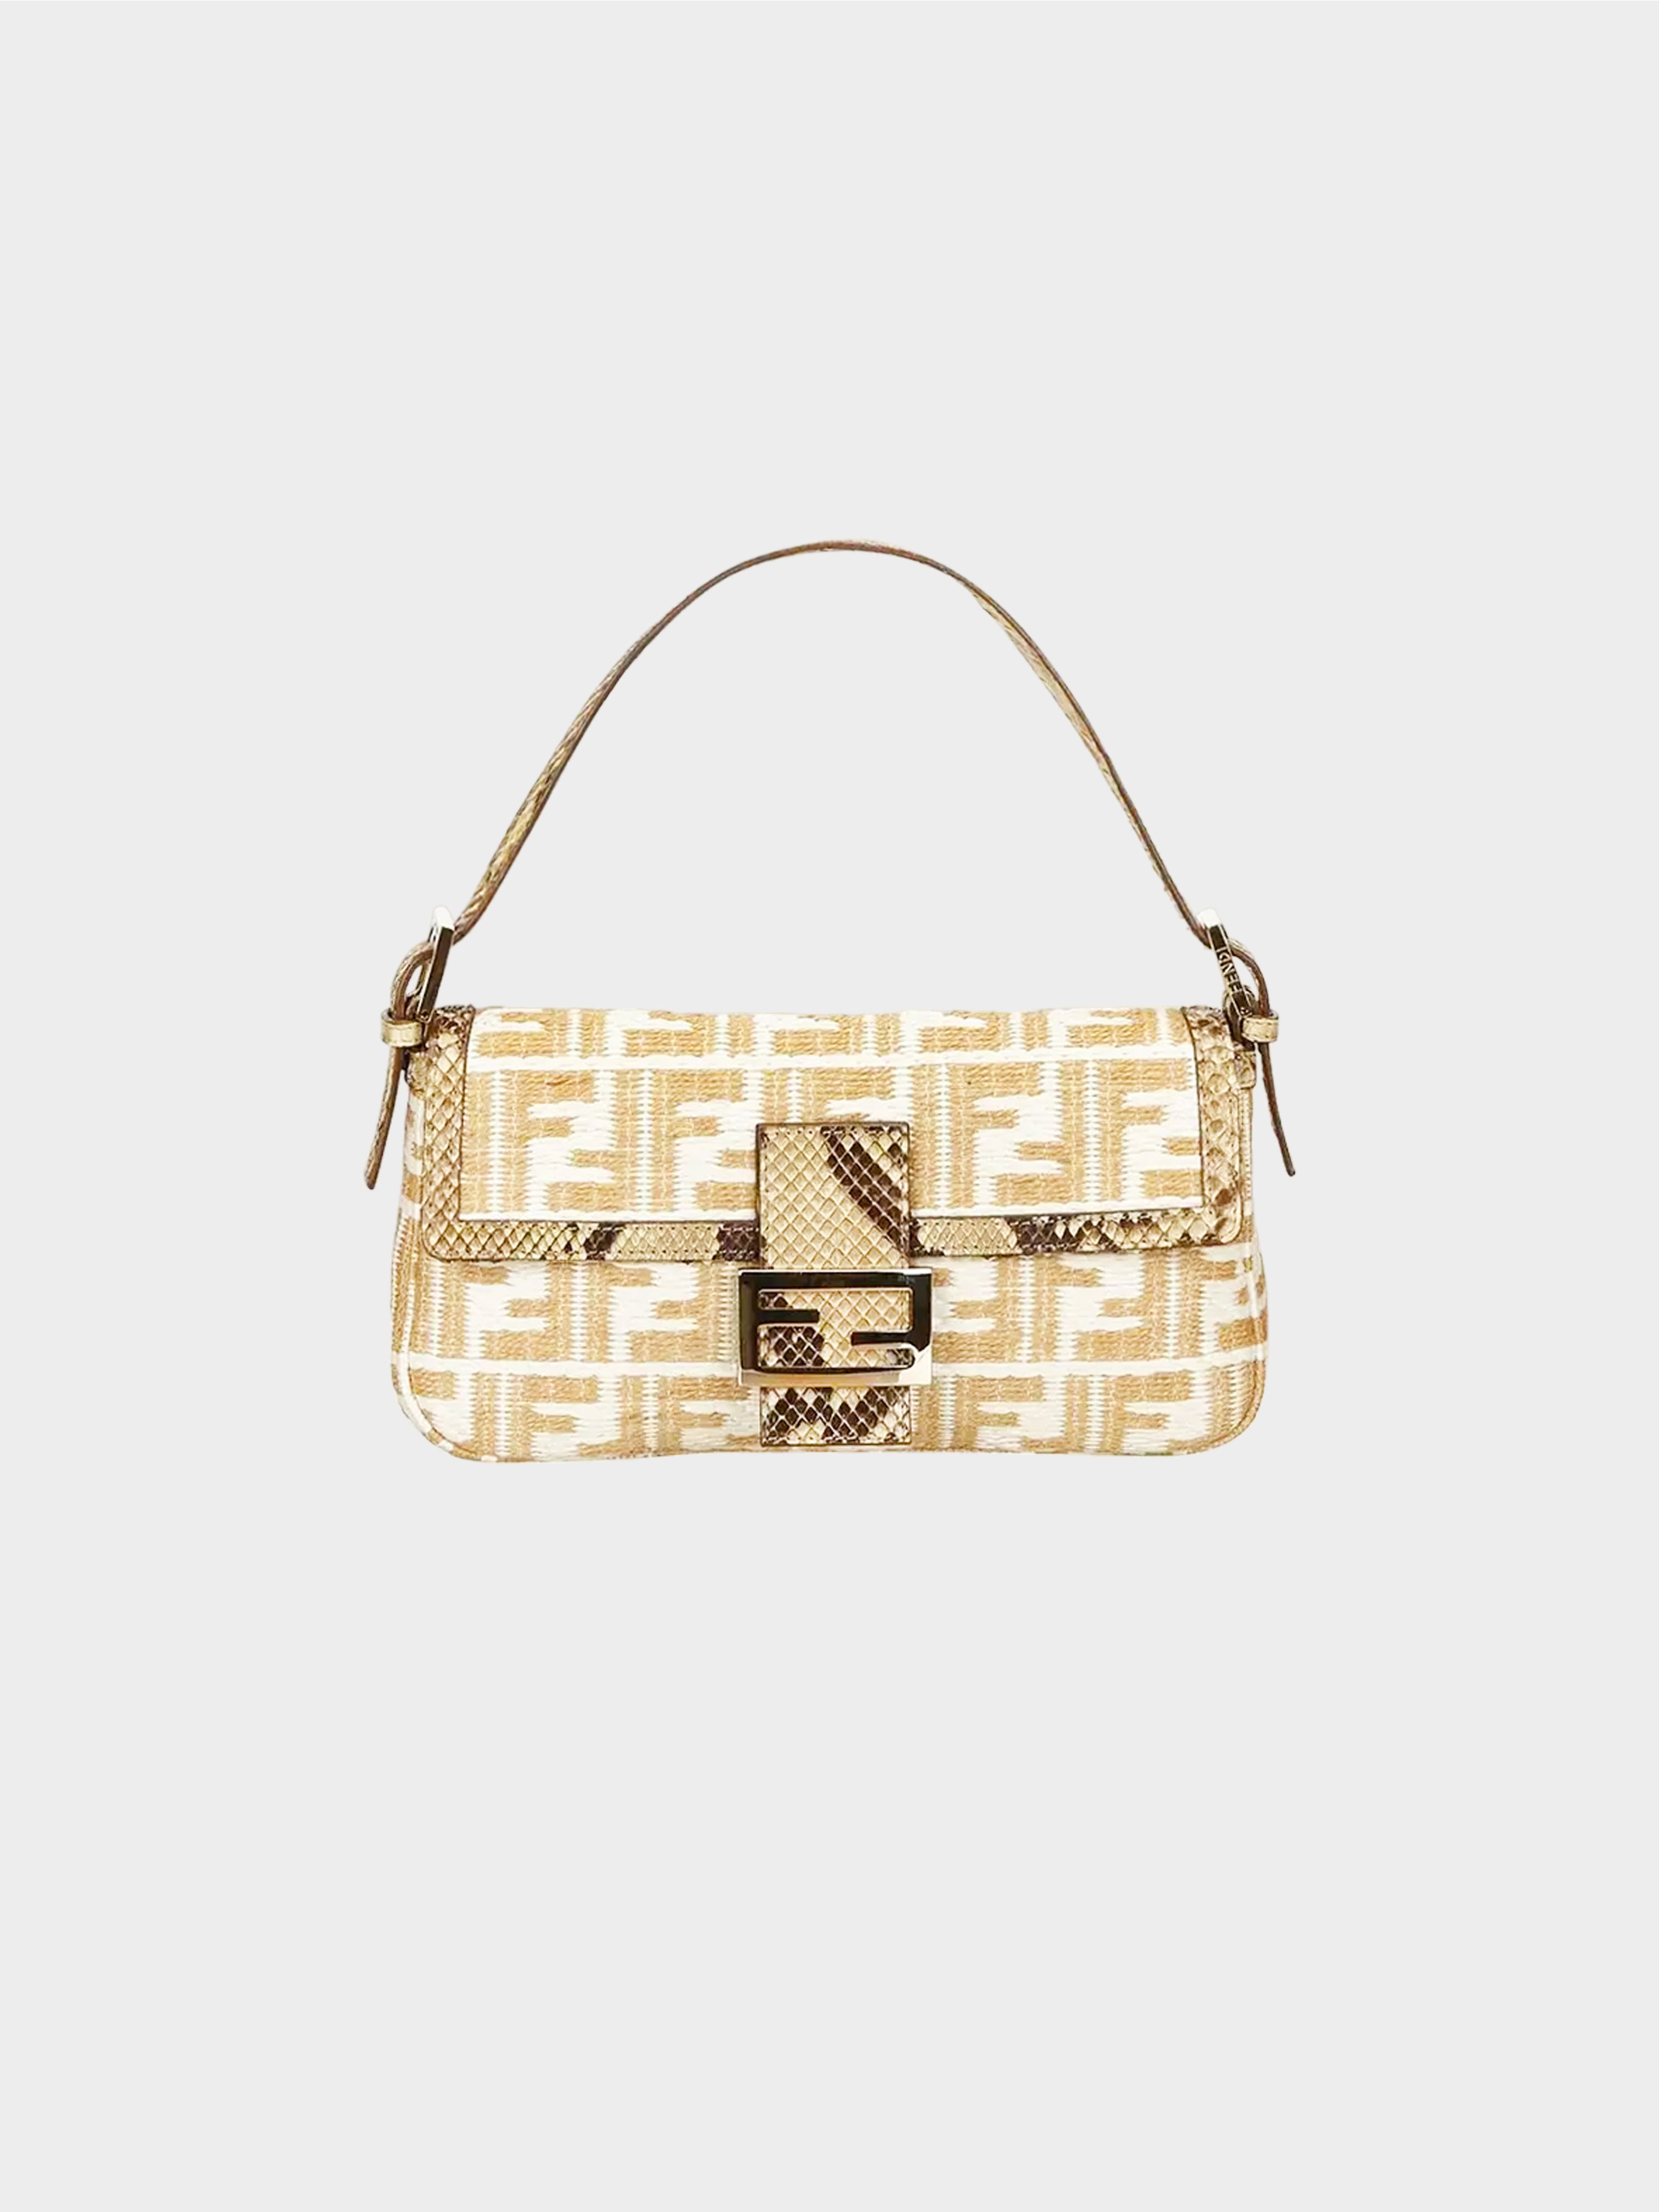 Fendi 2000s Beige and White Python-Trimmed Woven Zucca Baguette